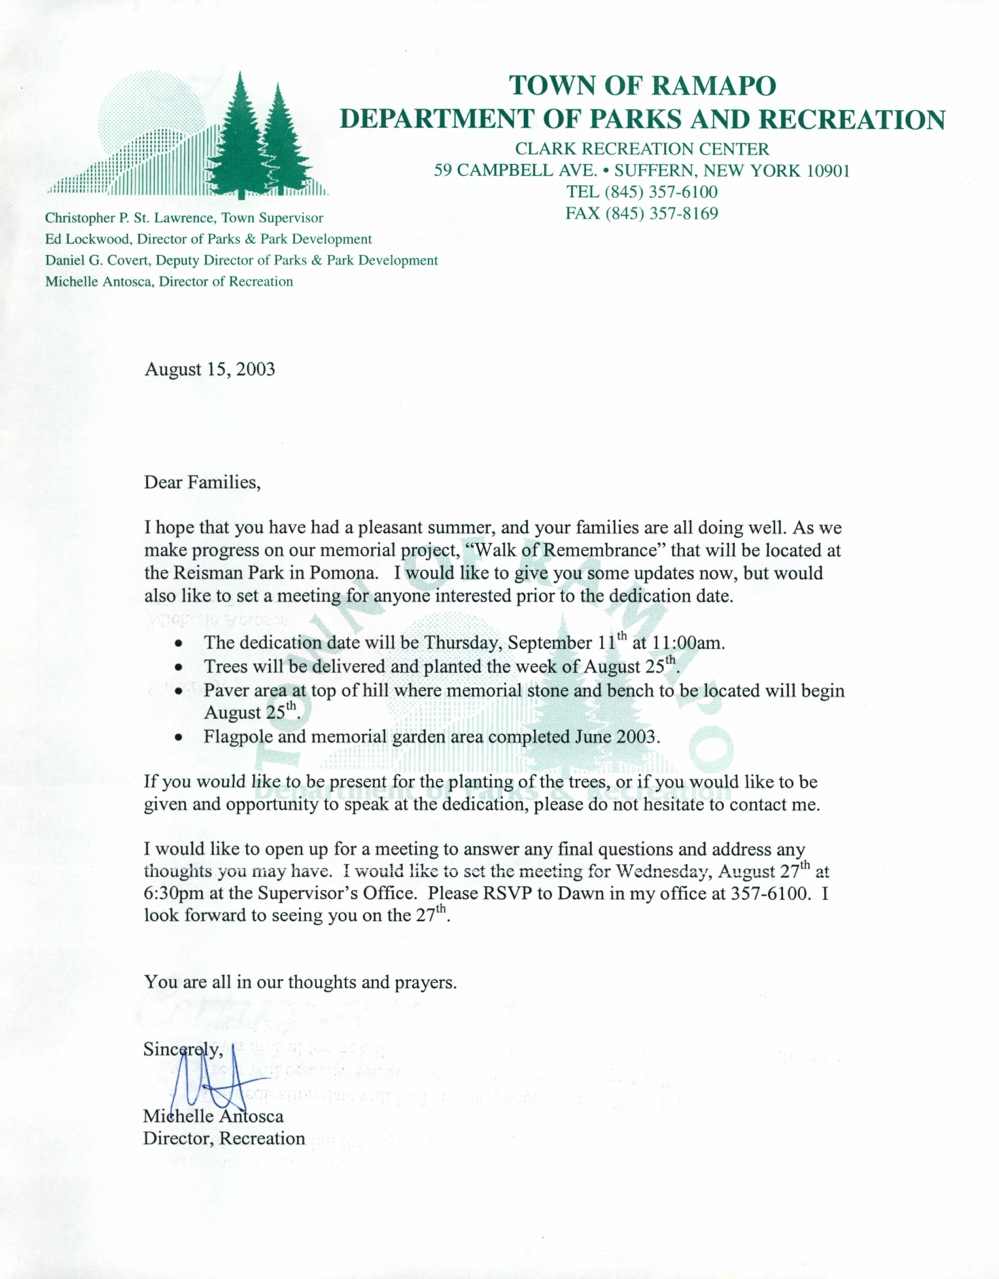 Letter from town concerning memorial project